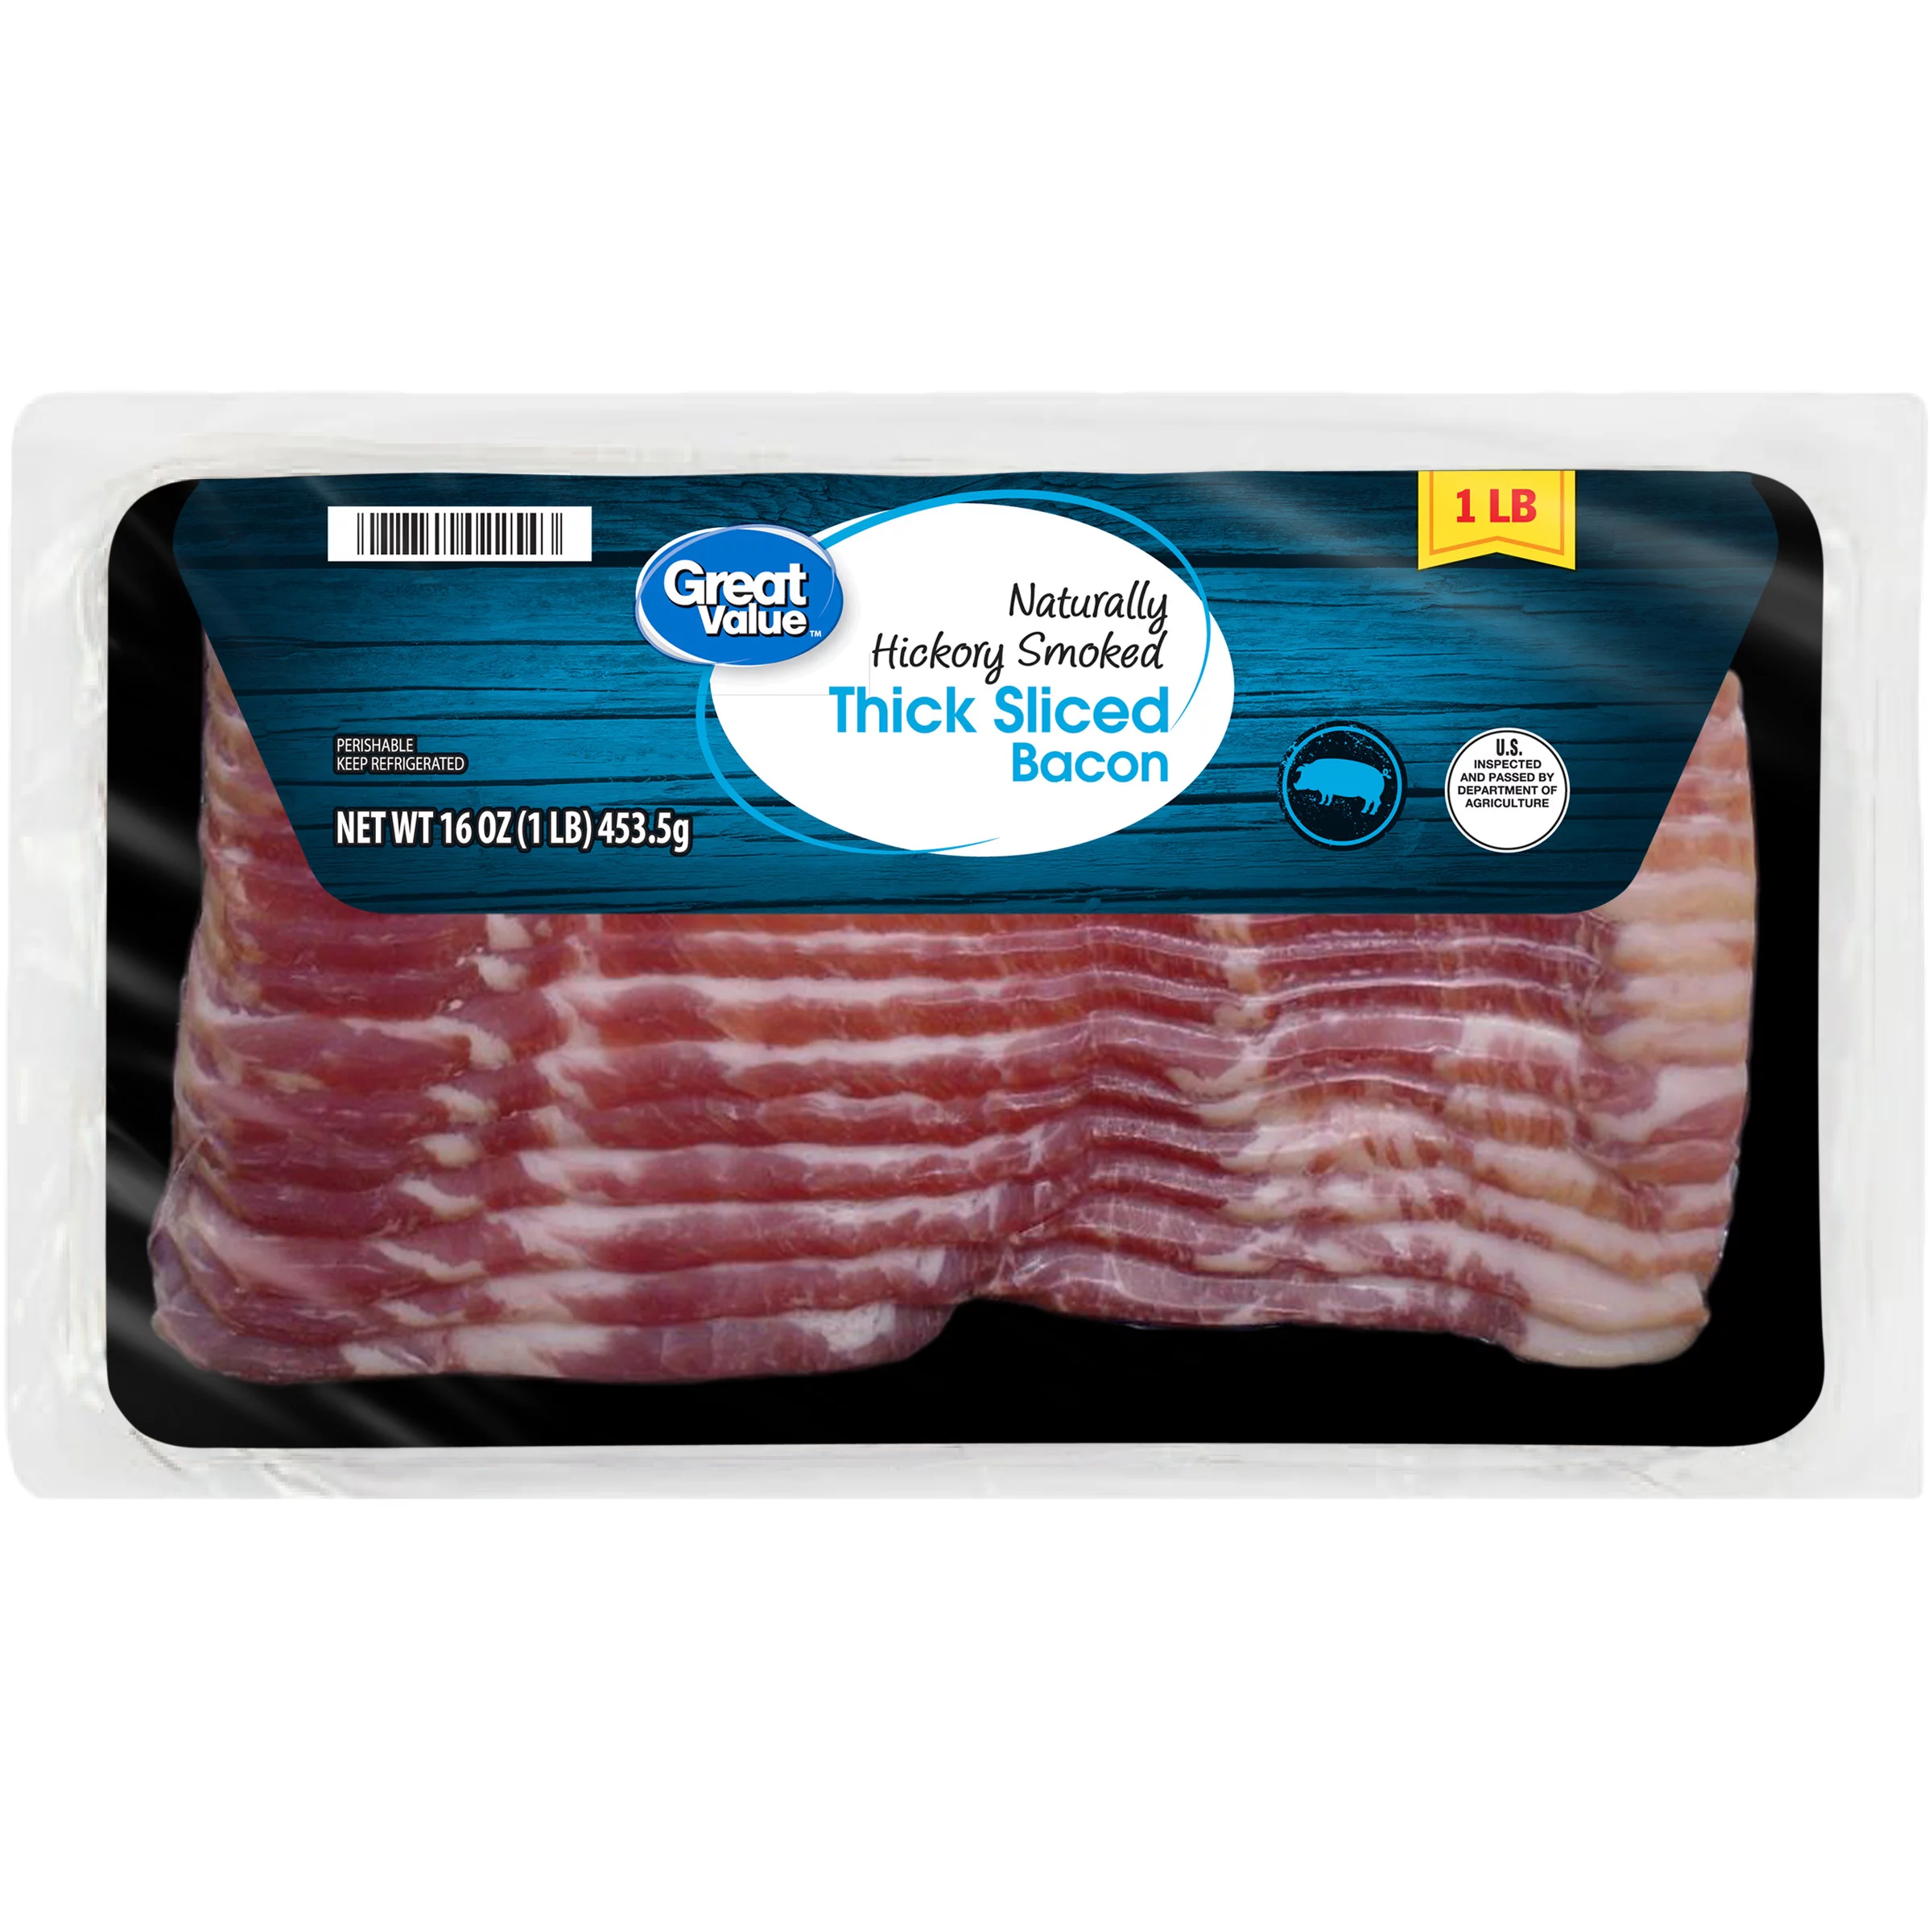 Great Value Thick Sliced Bacon, Natural Hickory Smoked, 16 oz